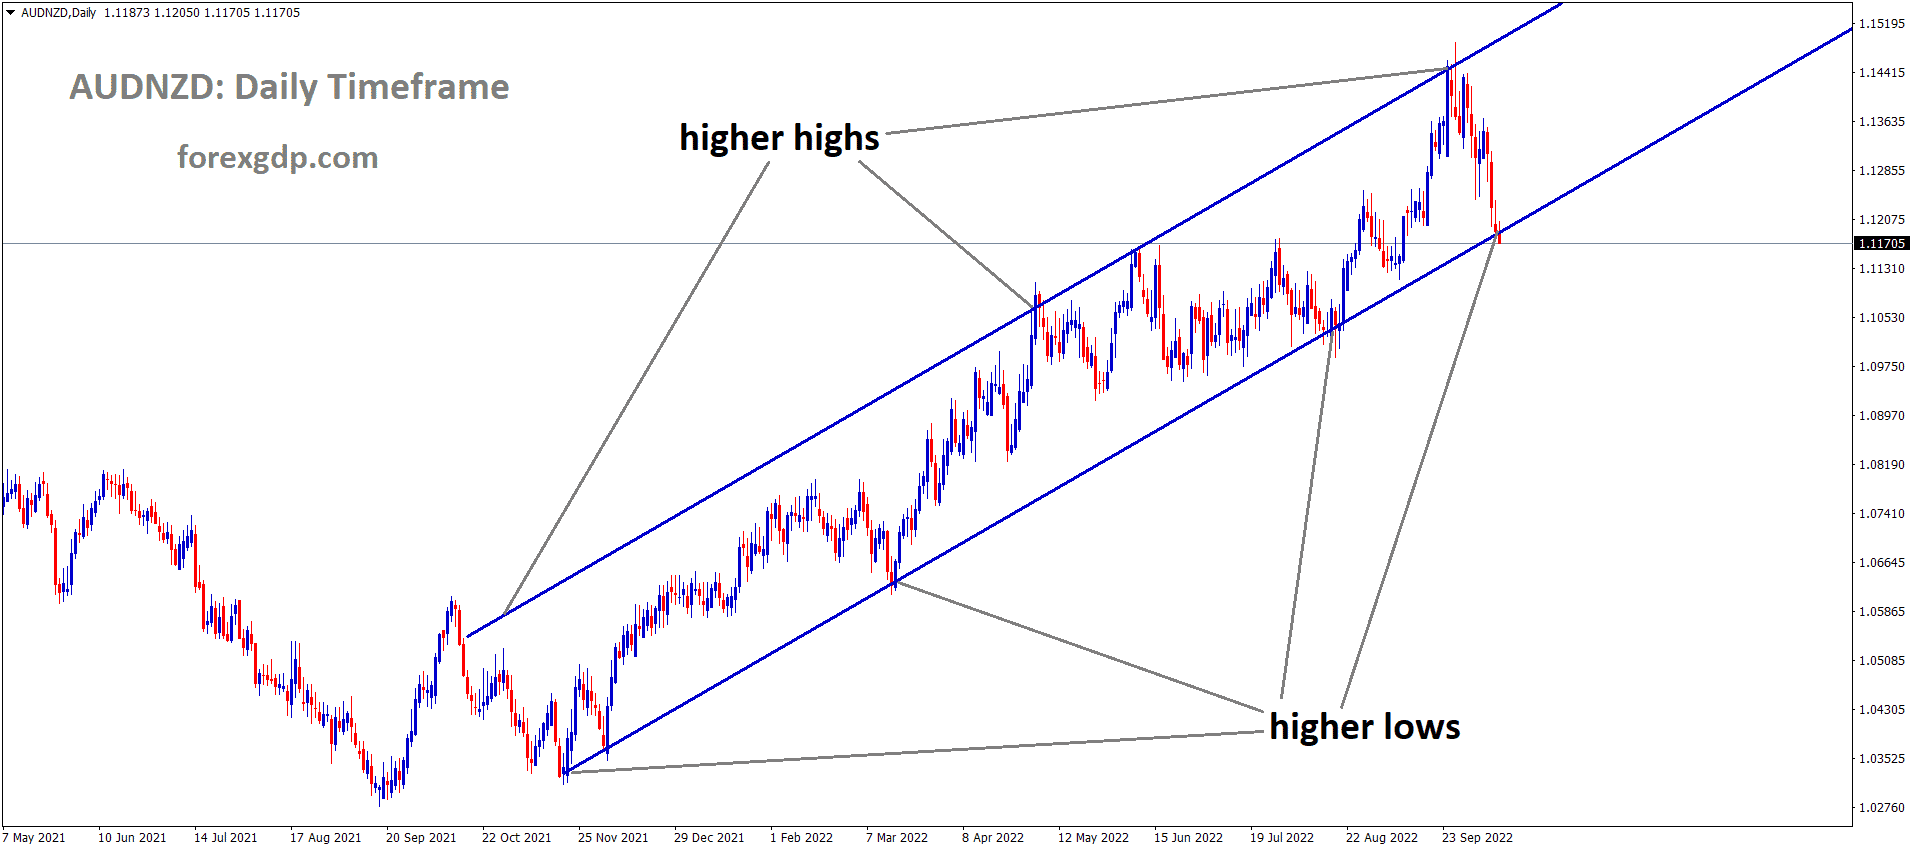 AUDNZD is moving in an Ascending channel and the market has reached the higher low area of the channel 1